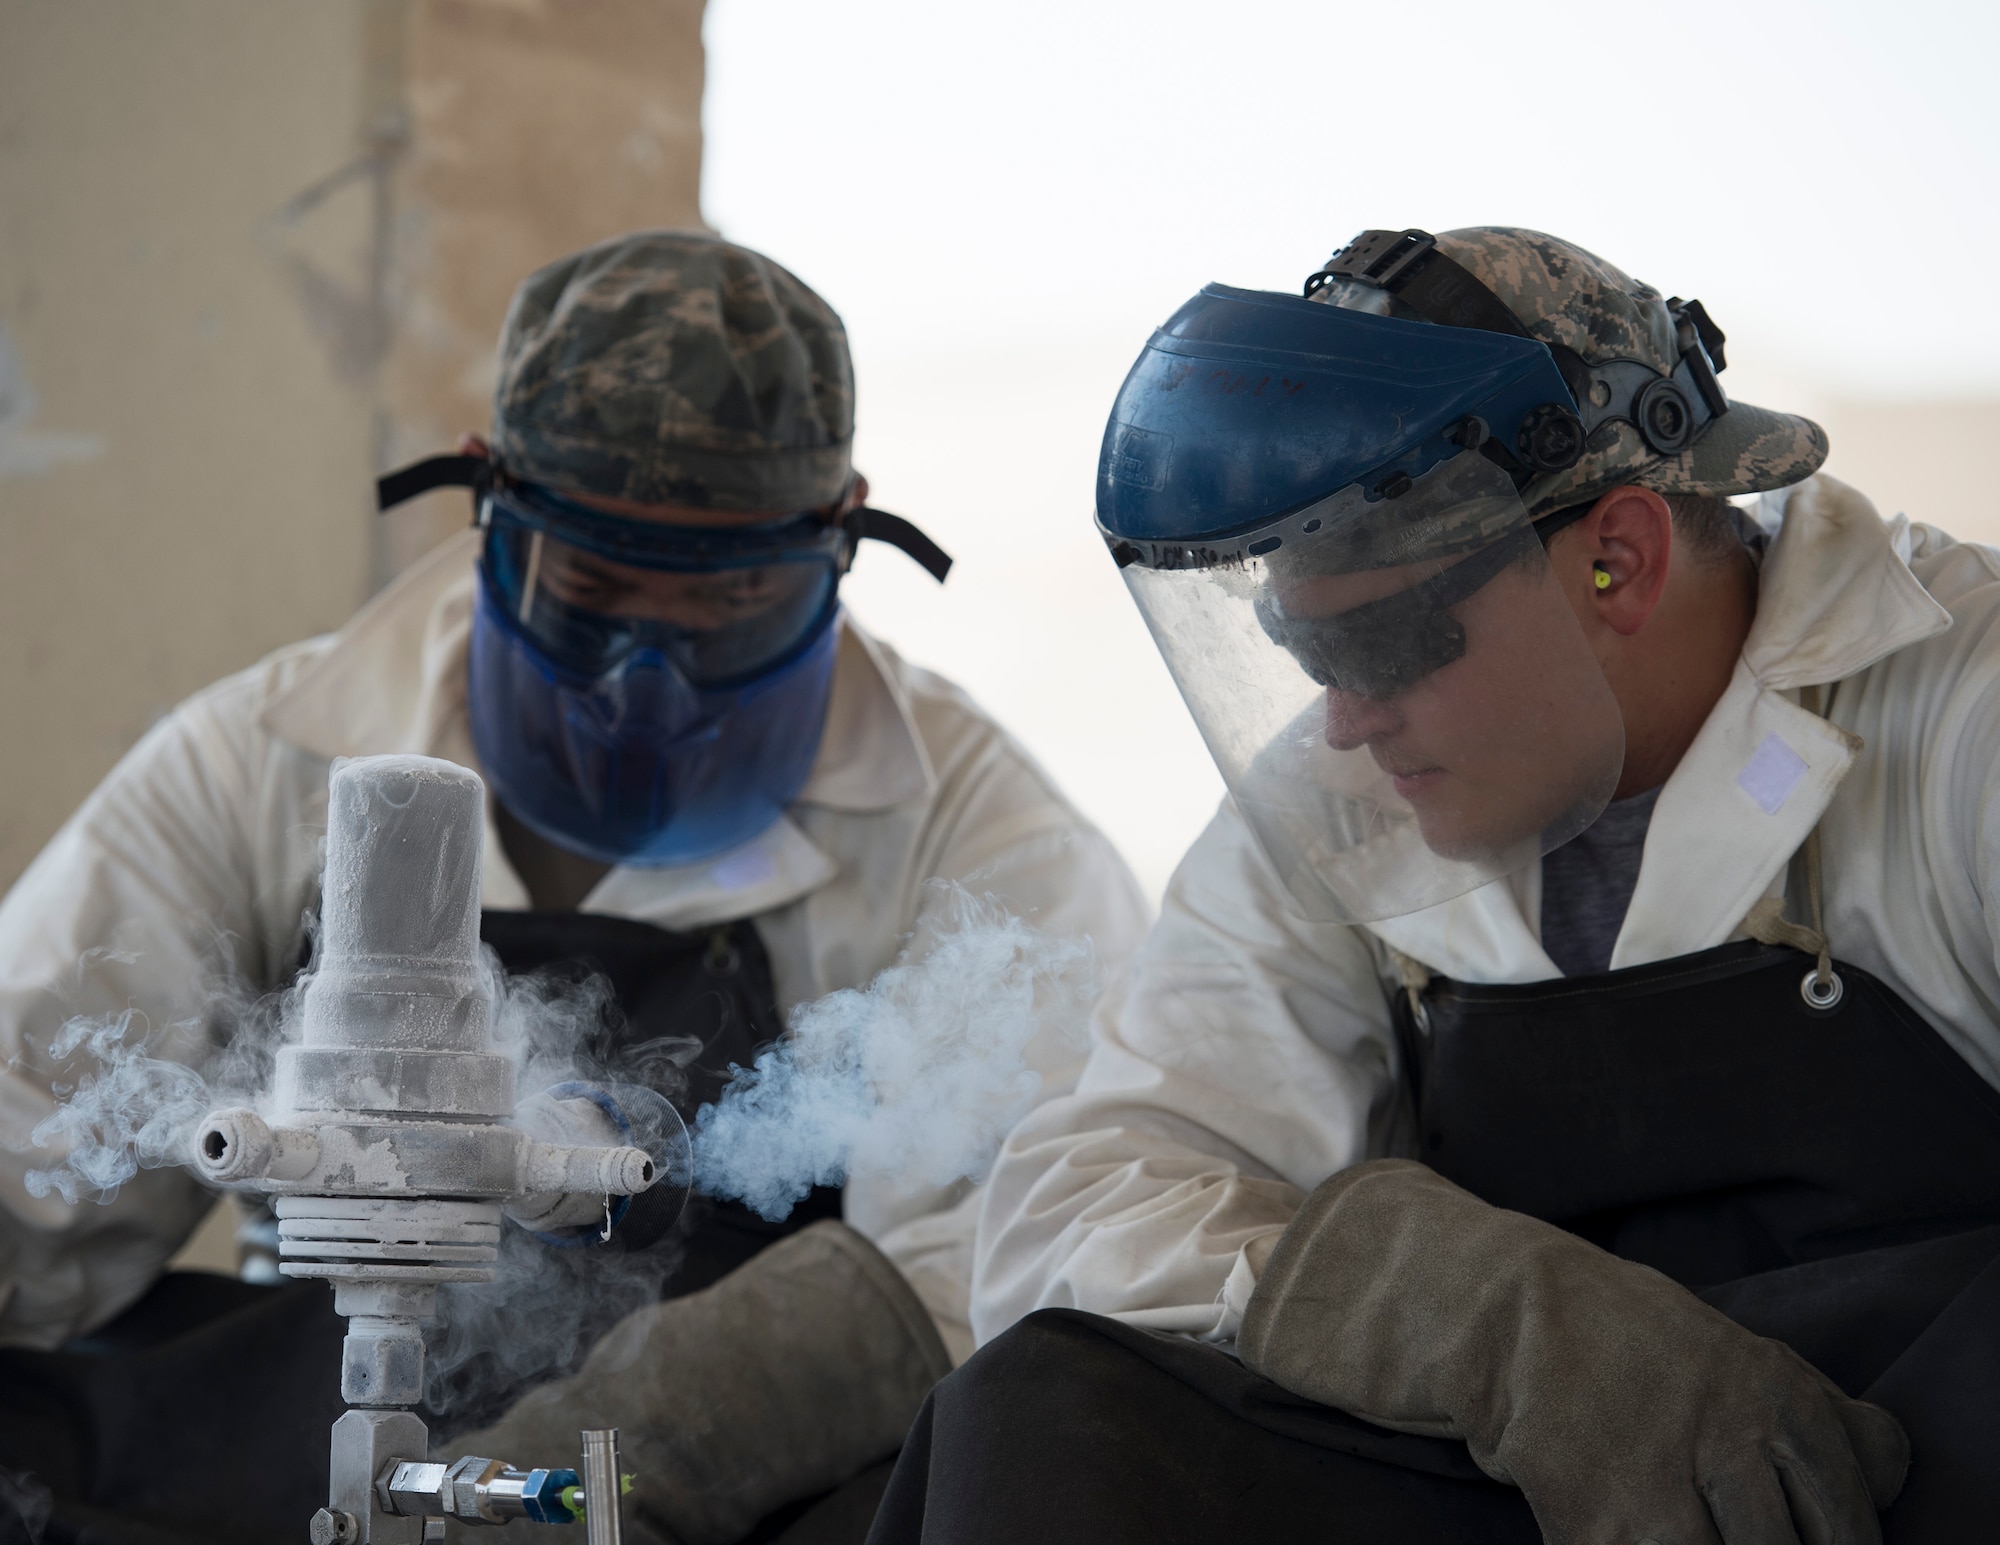 U.S. Air Force Staff Sgt. Kennie Delmo, left, a cryogenics supervisor and Senior Airman Samuel Fallot, a cryogenics journeyman with the 379th Expeditionary Logistics Readiness Squadron, Fuels Management Flight, wait for the pounds per square inch levels to increase on the cryogenic sampler at Al Udeid Air Base, Qatar, Aug. 9, 2017.